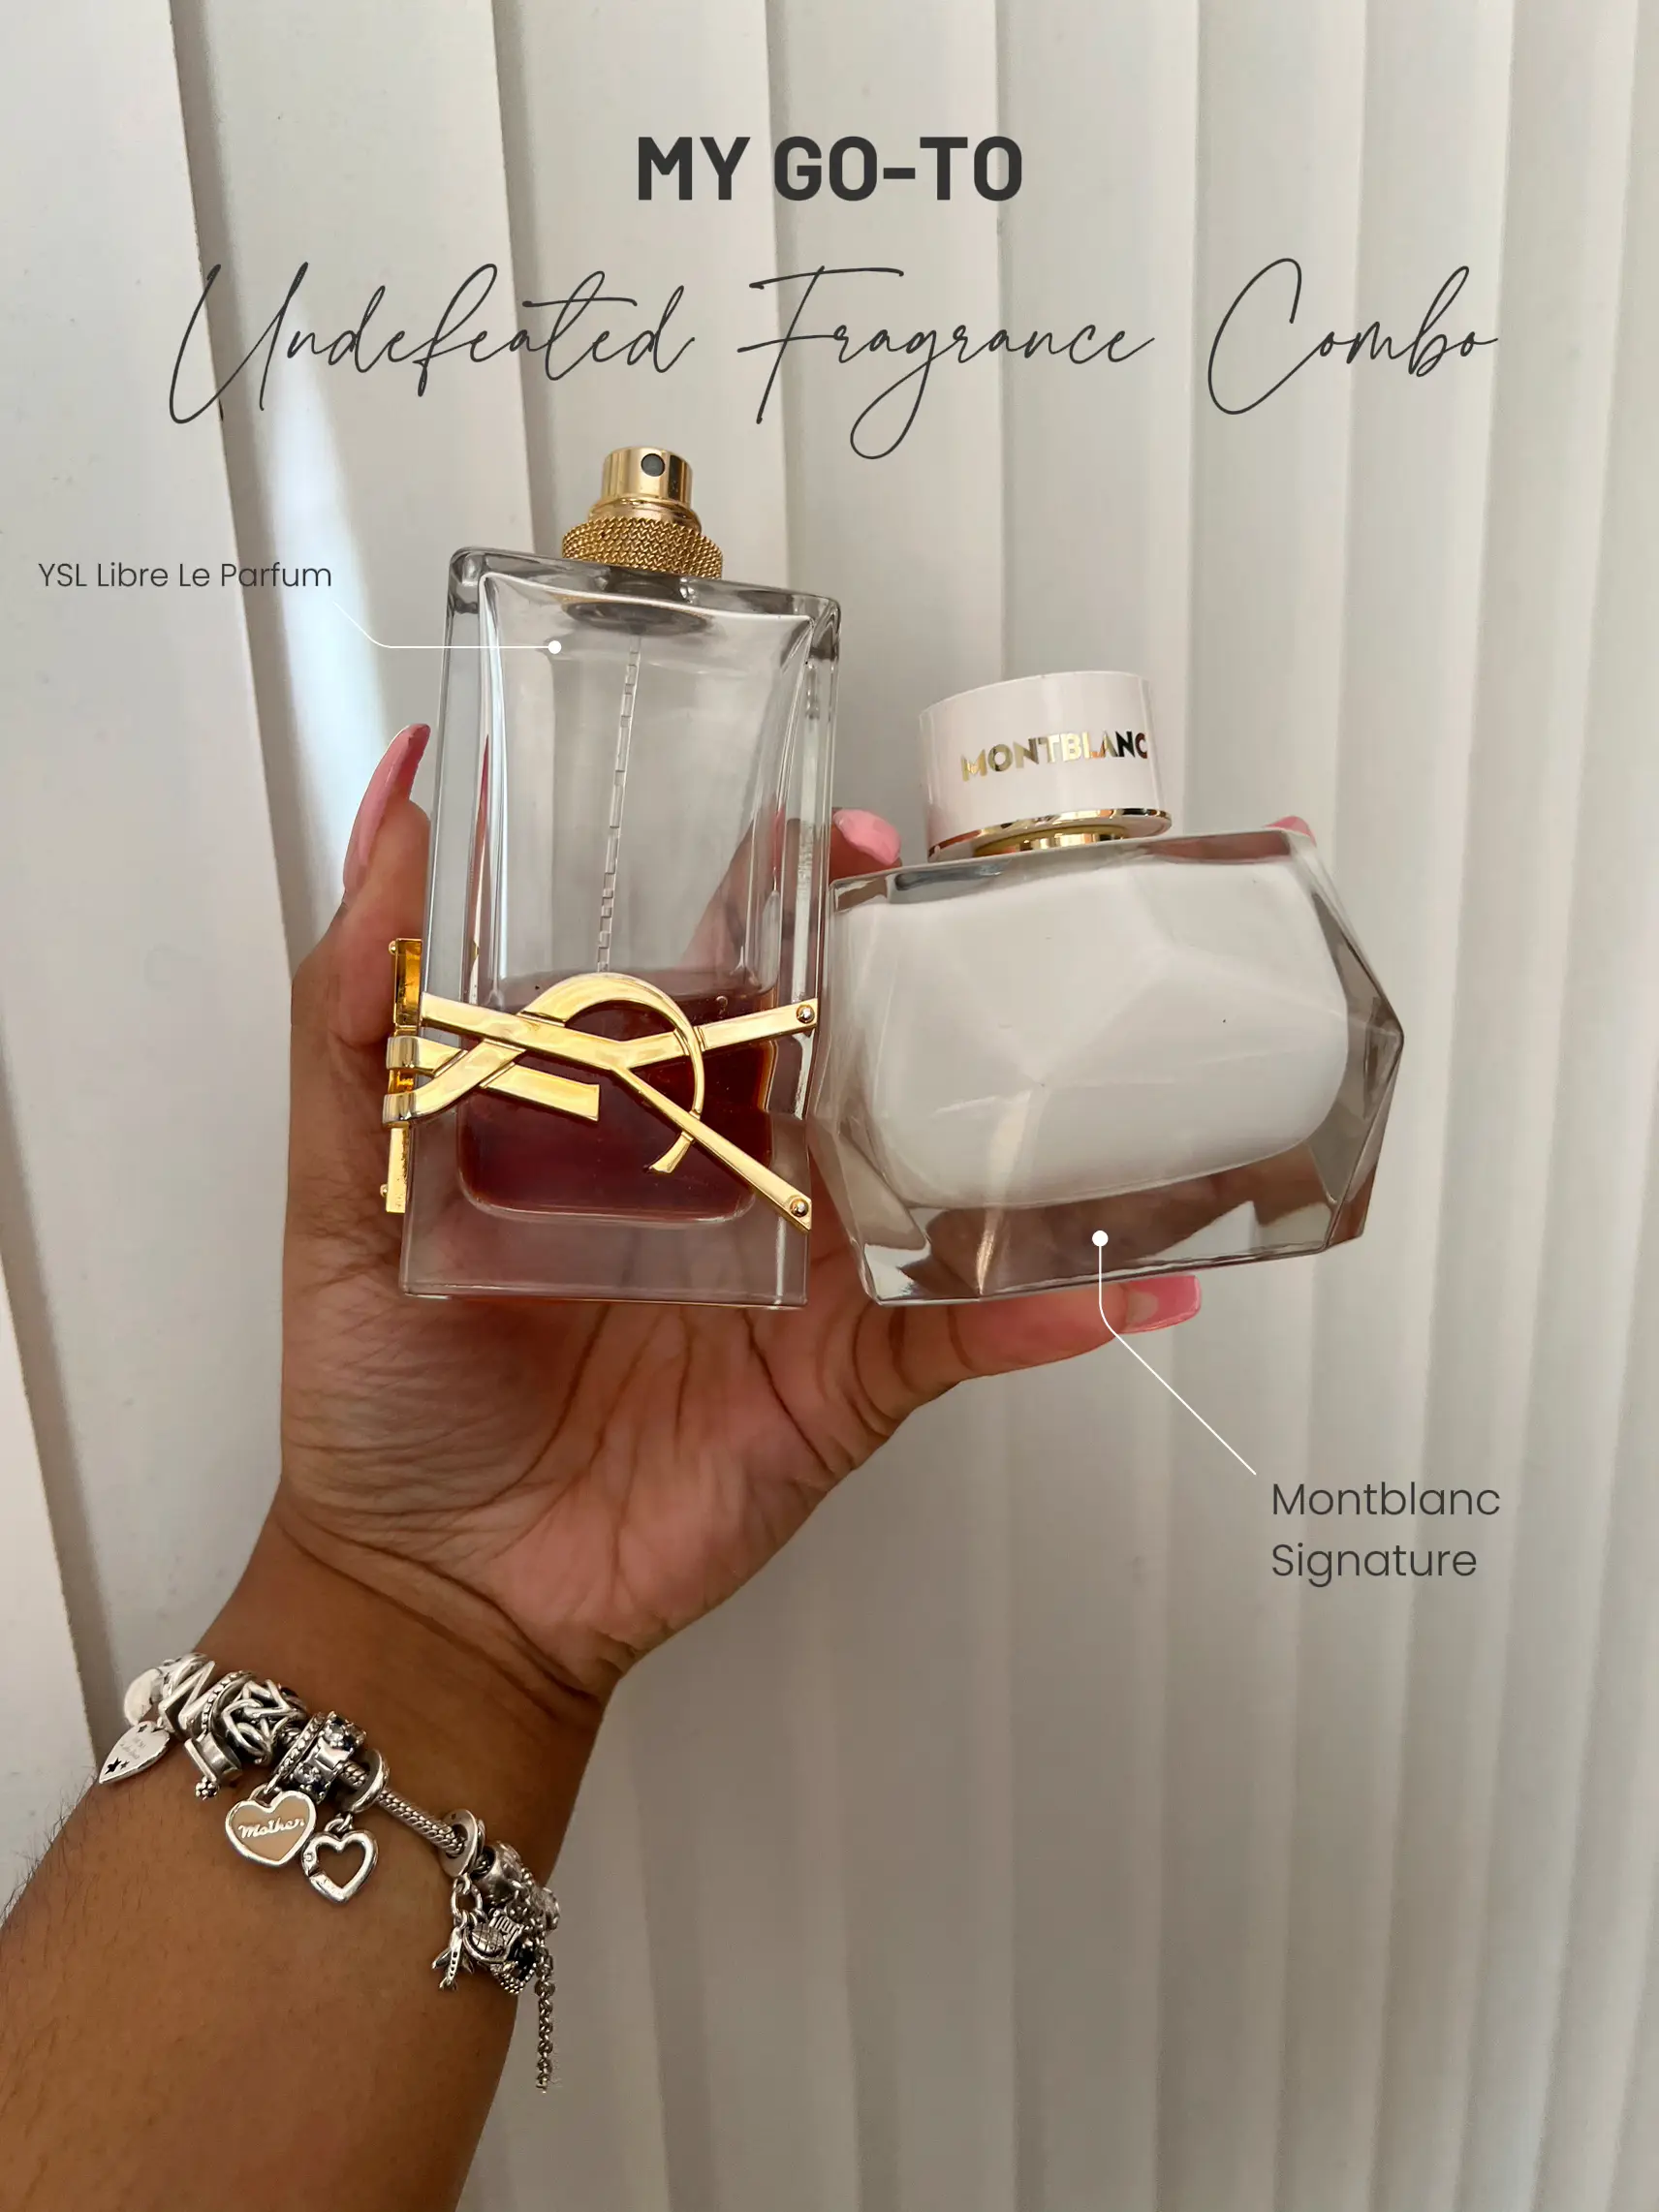 Undefeated Fragrance Combo pt. 1, Gallery posted by Novella Joy